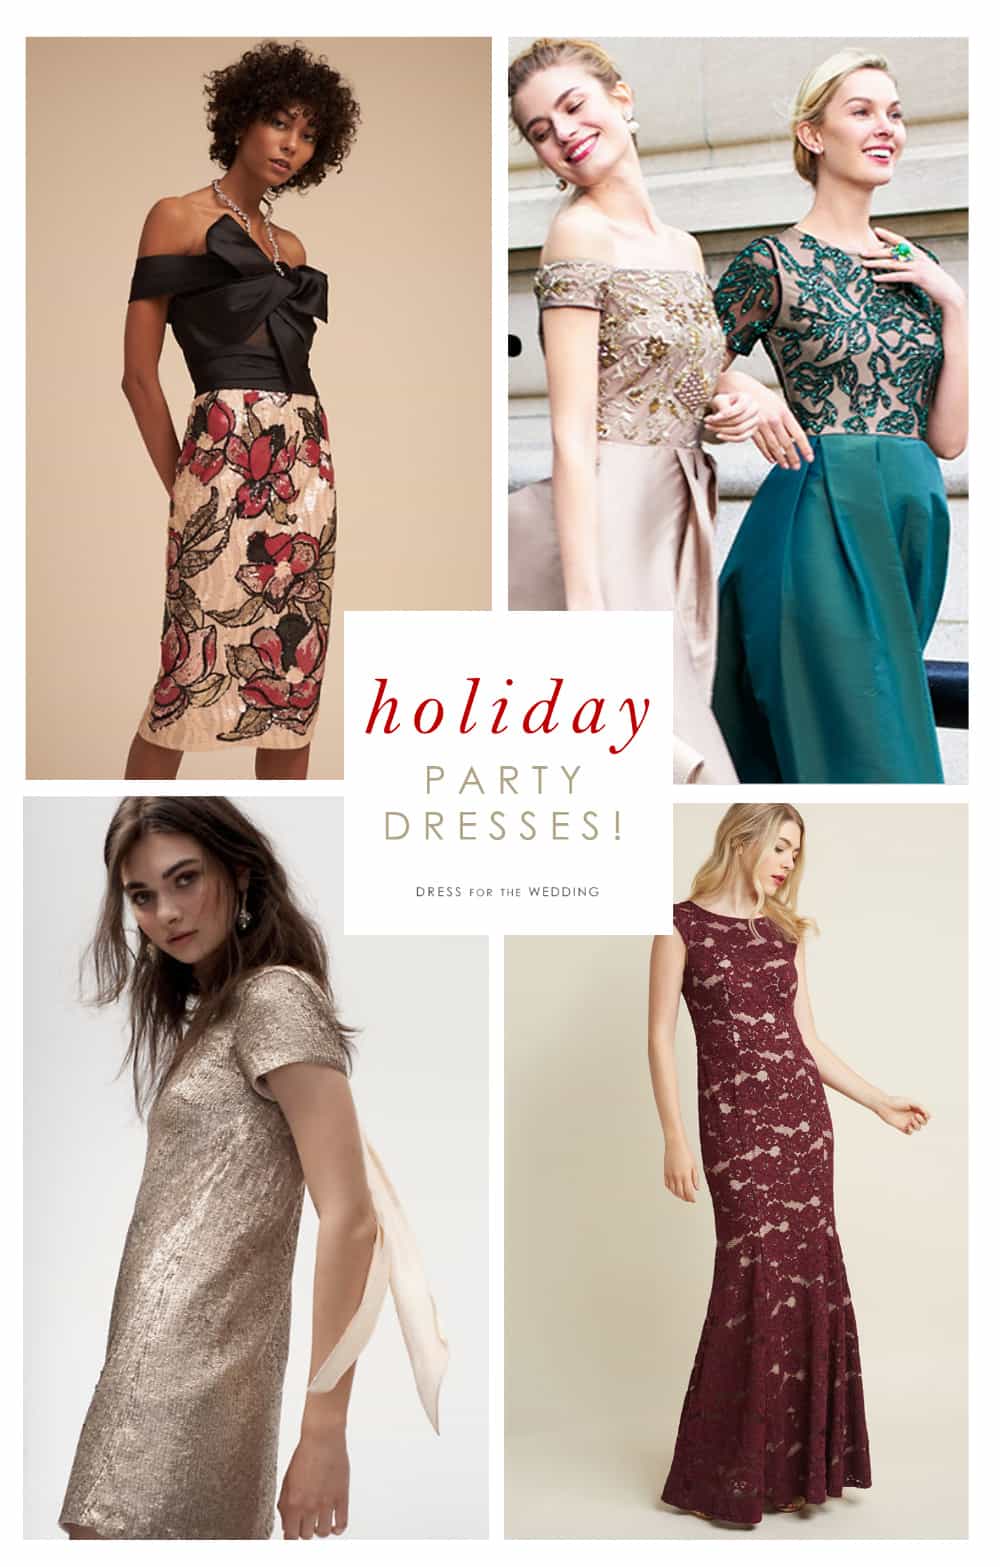 90 of The Best Holiday Party Dresses for The Season- Dress for the Wedding